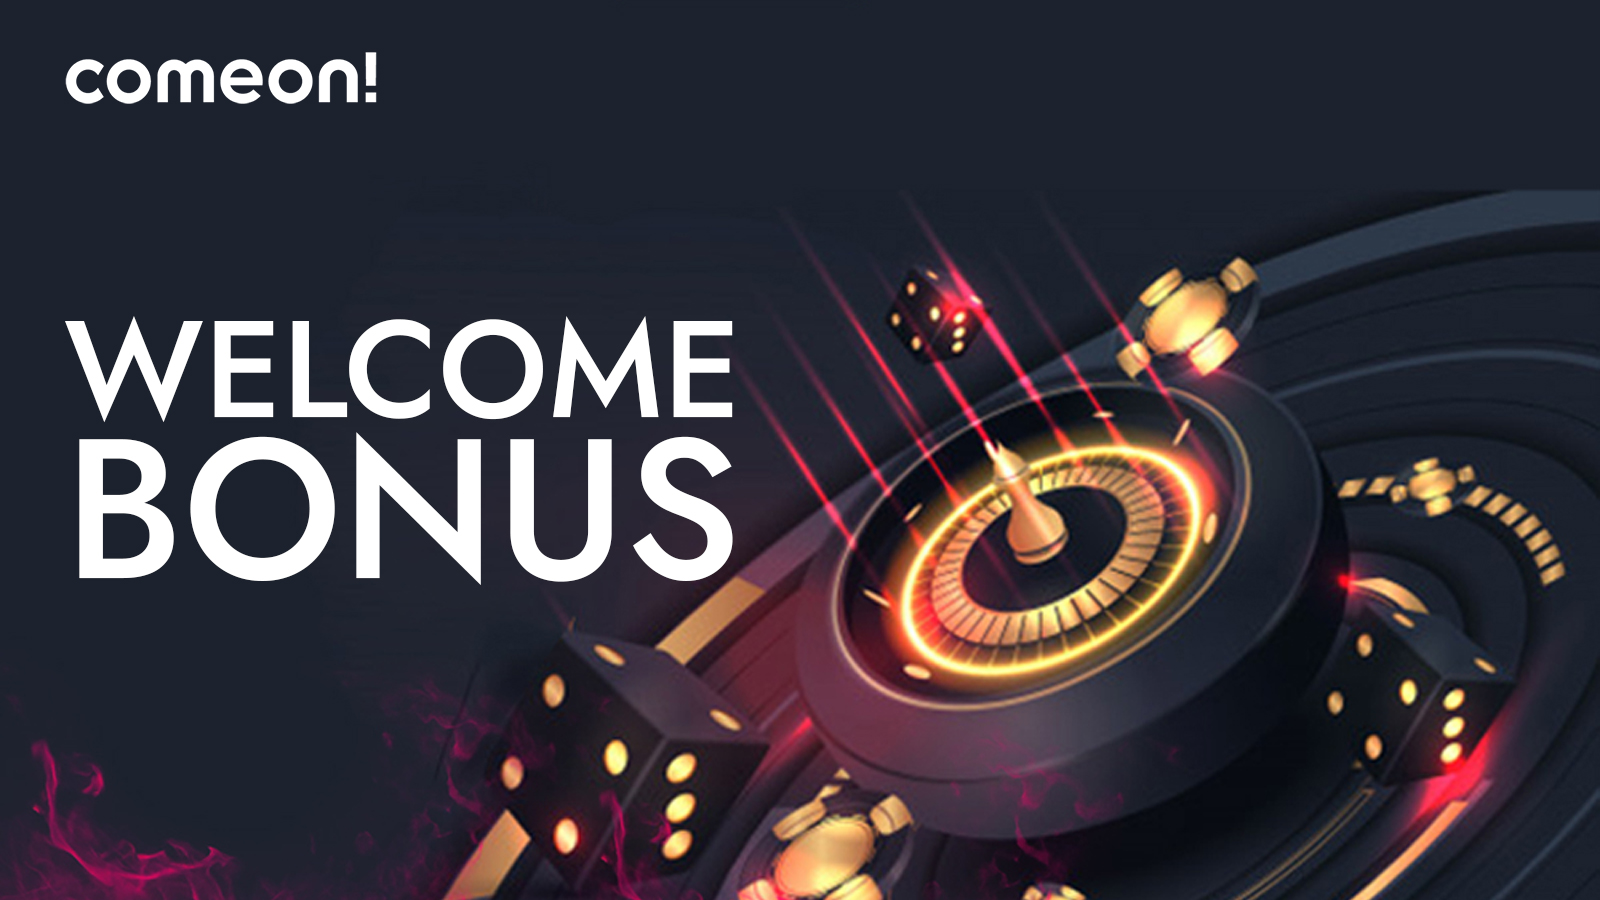 Sign up for Comeon Casino and get a 100% welcome bonus.